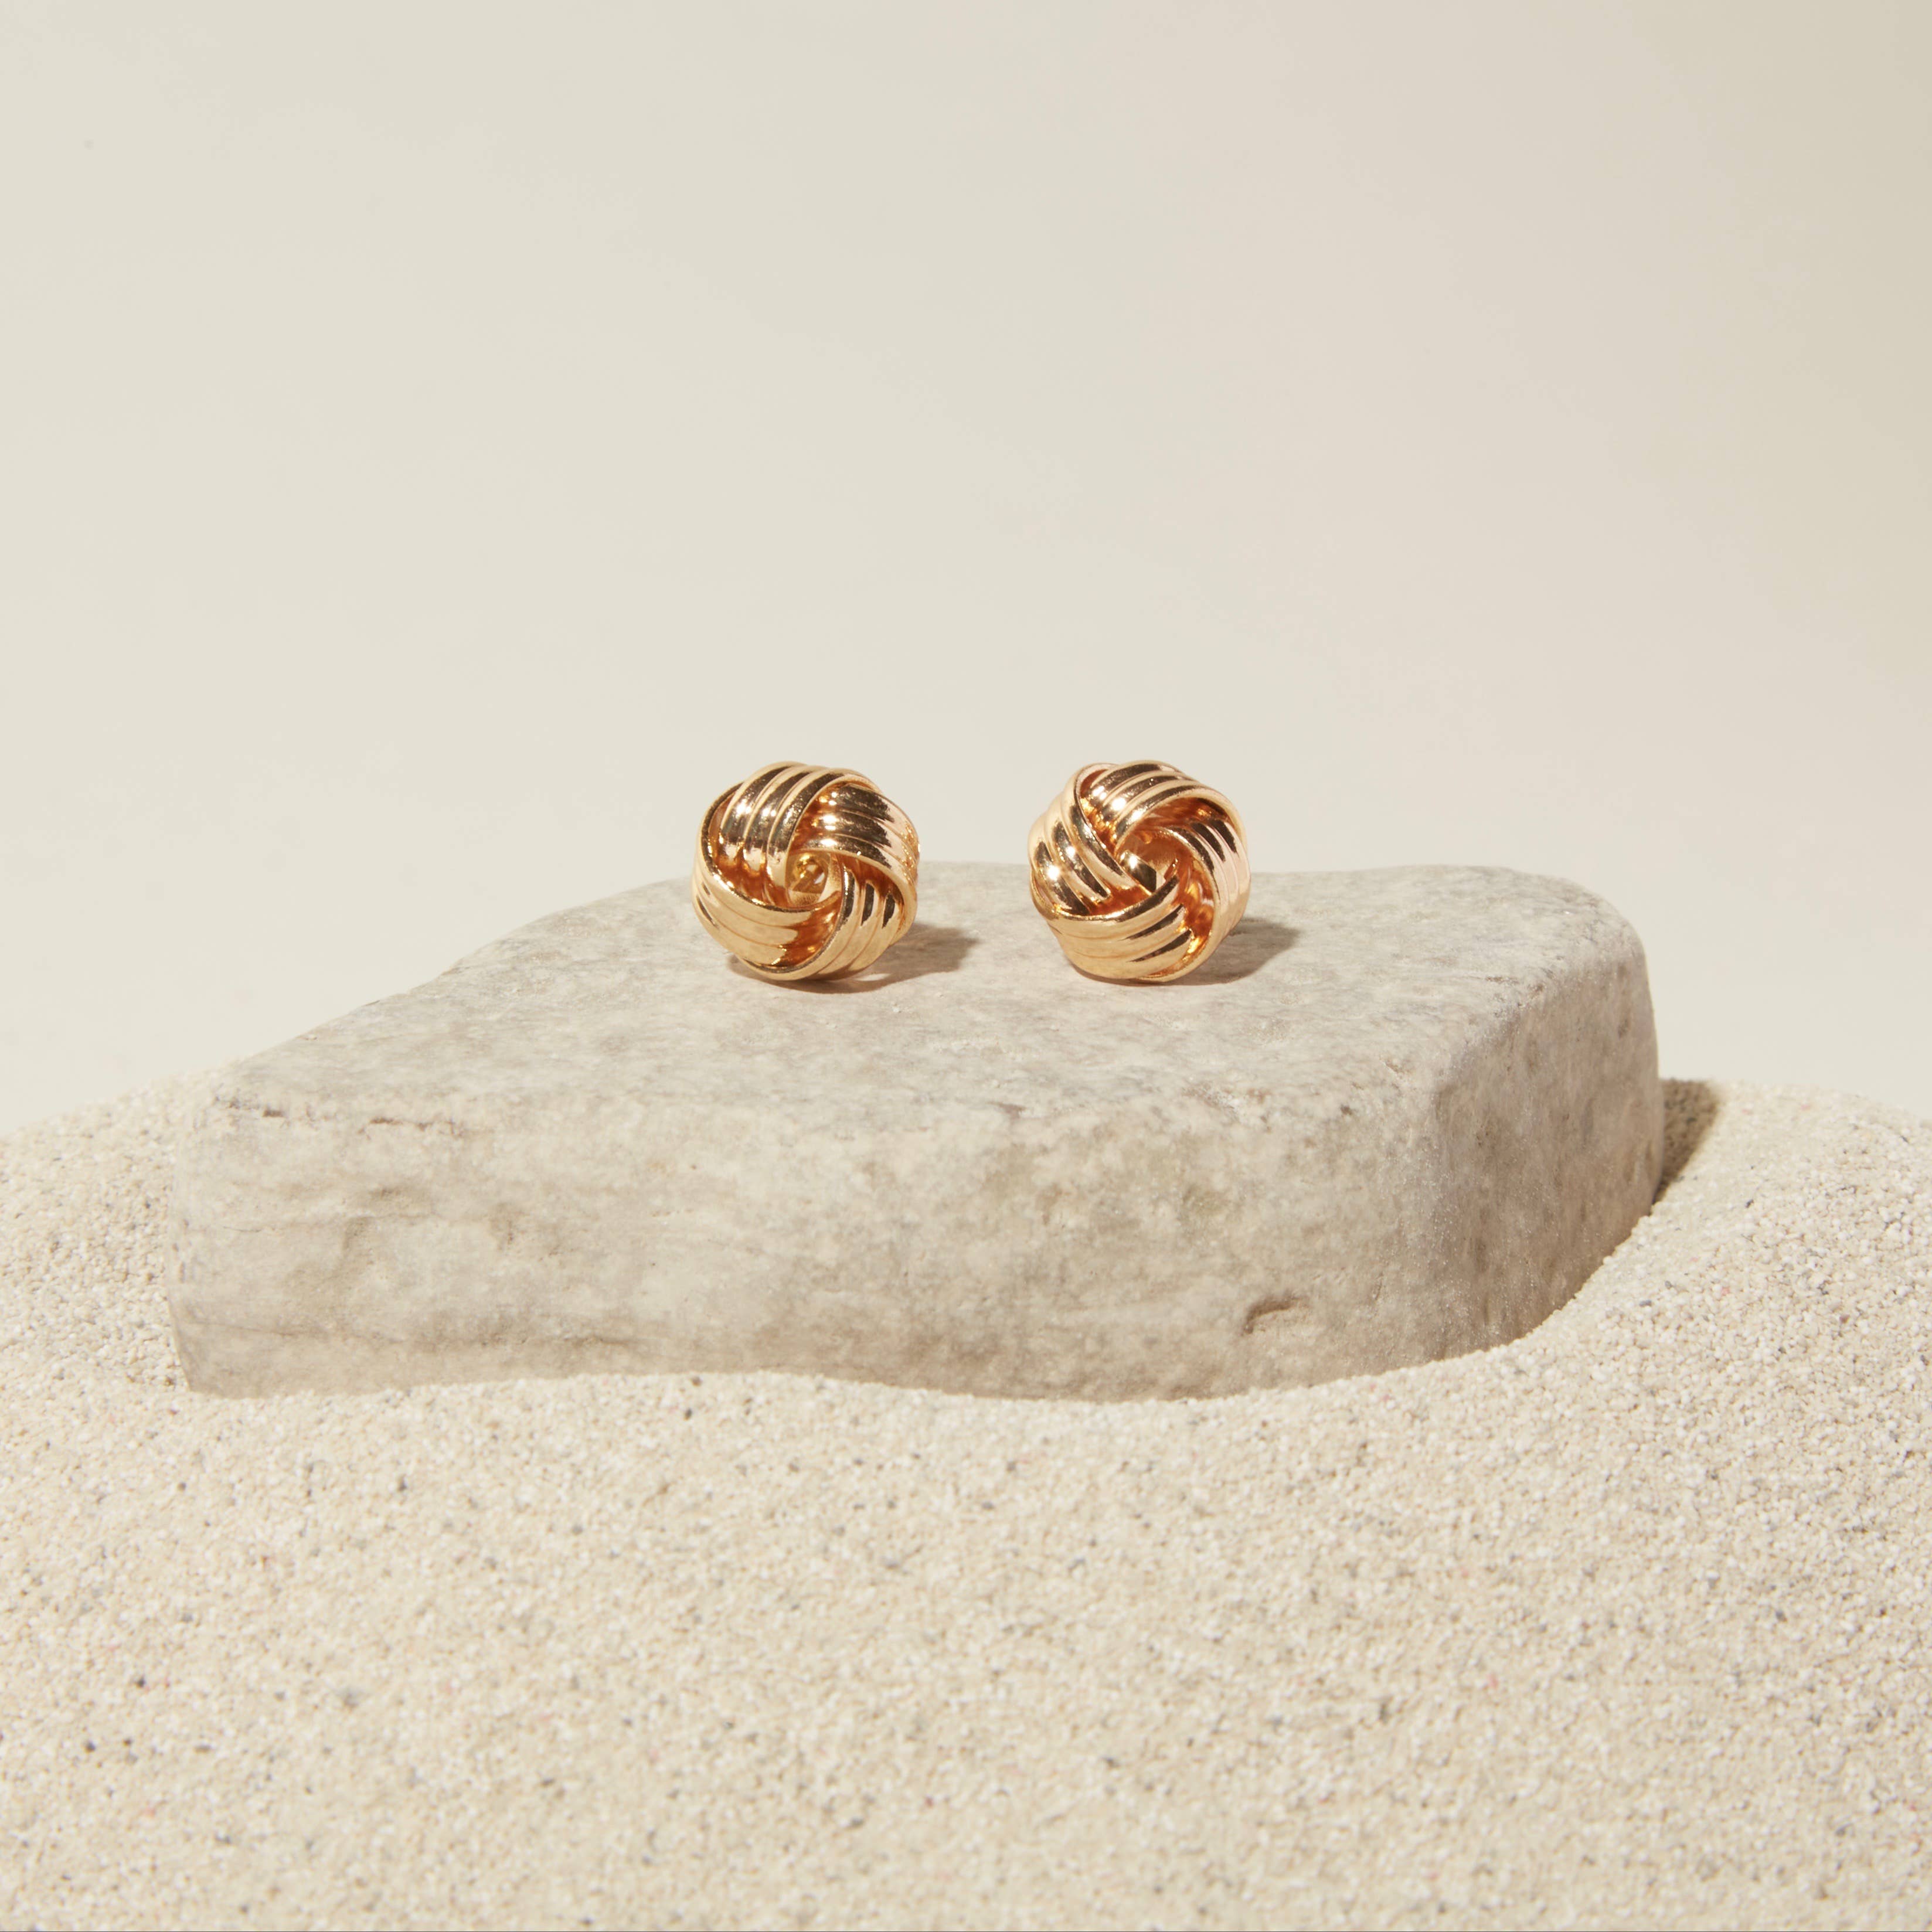 small gold knot stud earrings sitting on a rock in the sand